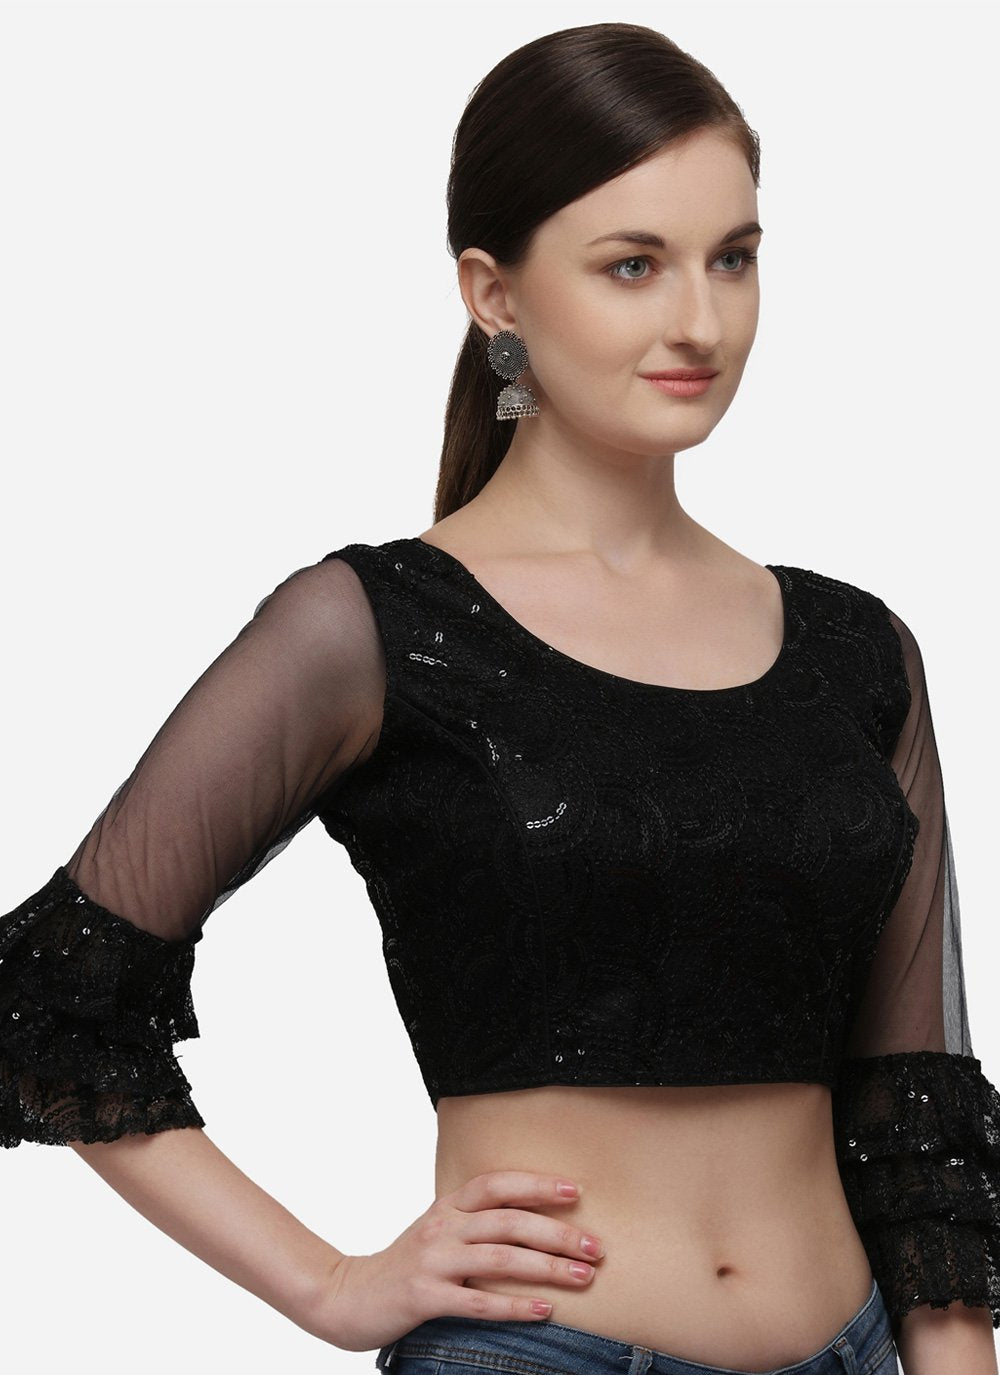 Blouse Net Black Embroidered Blouse